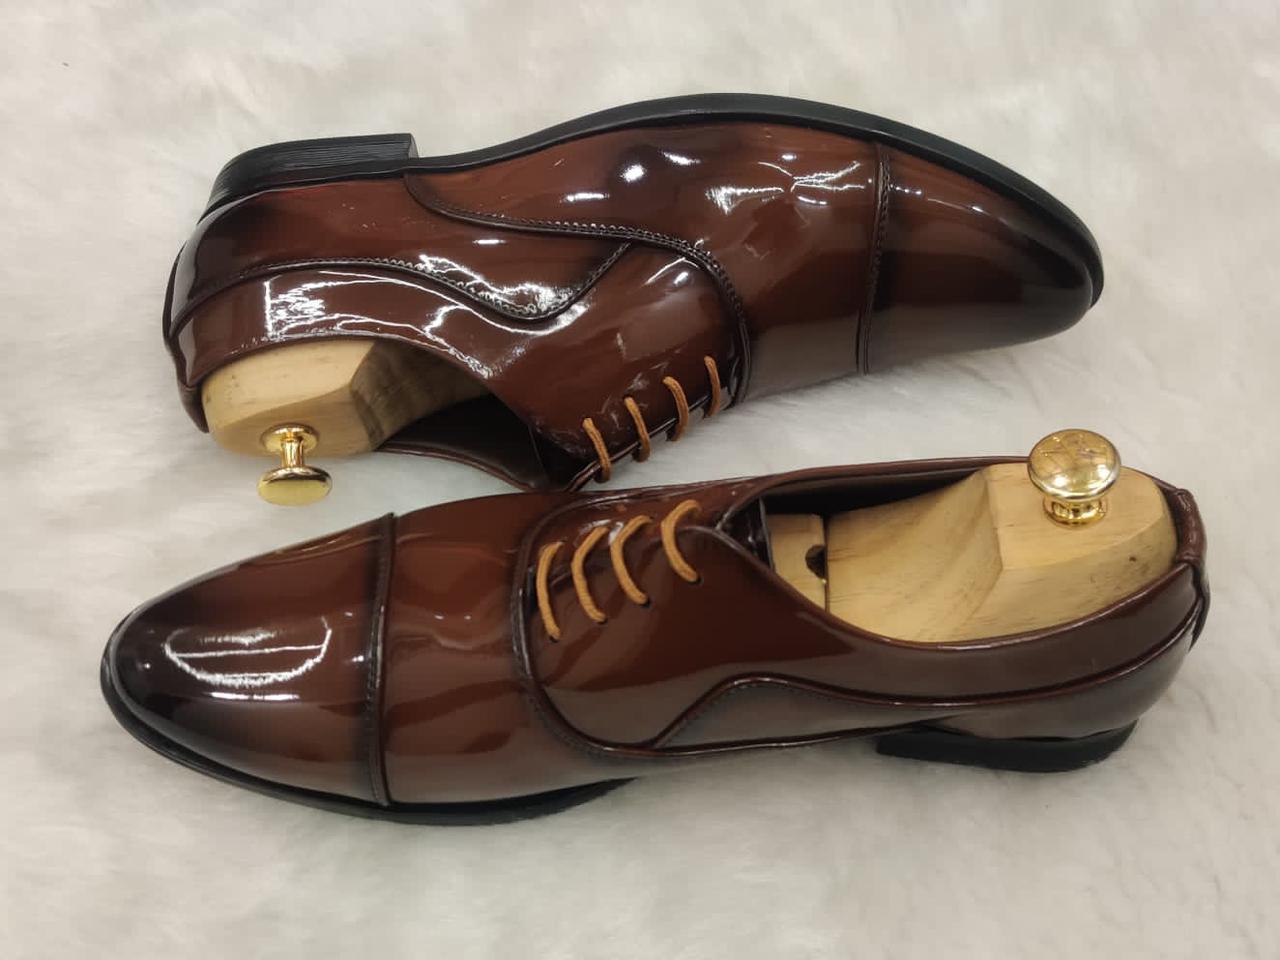 Classic Patent High Quality Leather Formal Shoes For Party And Office-UniqueandClassy